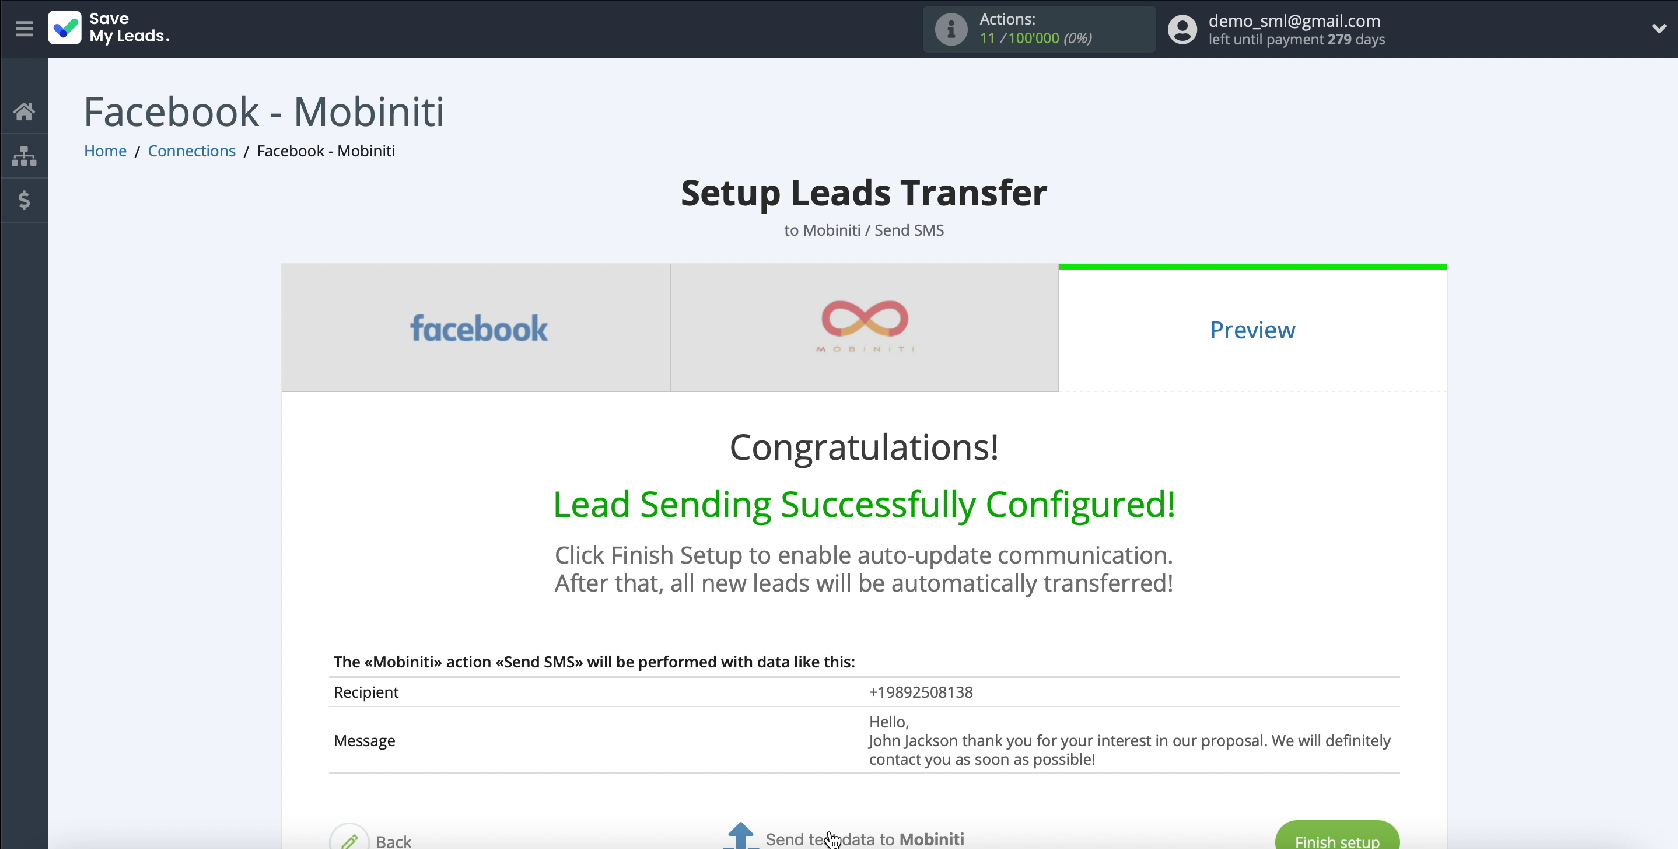 How to Send SMS via Mobiniti from New Facebook Leads | Send test data